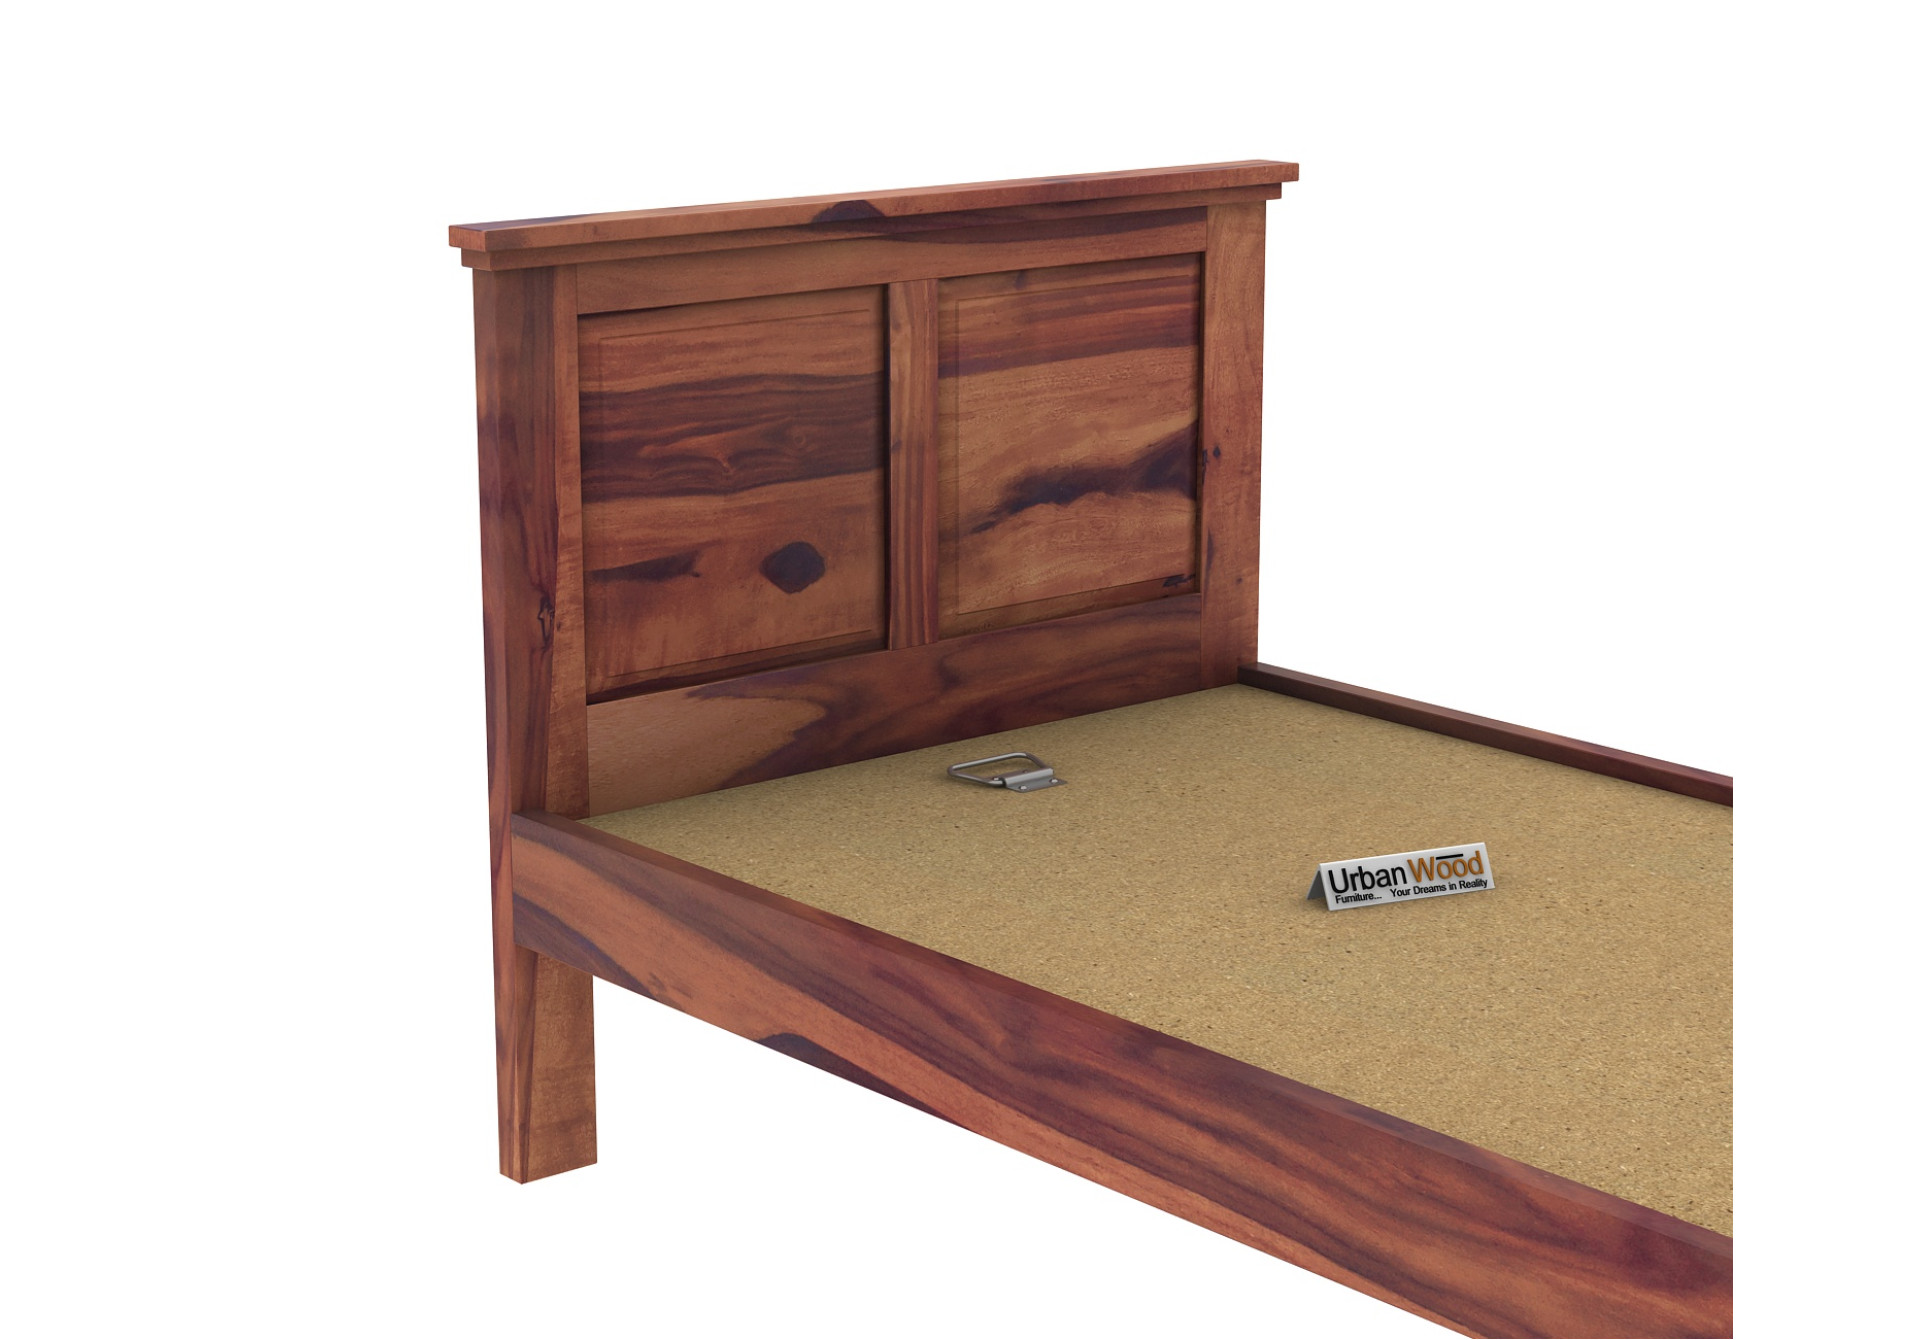 Babson Single Bed Without Storage ( Teak Finish )